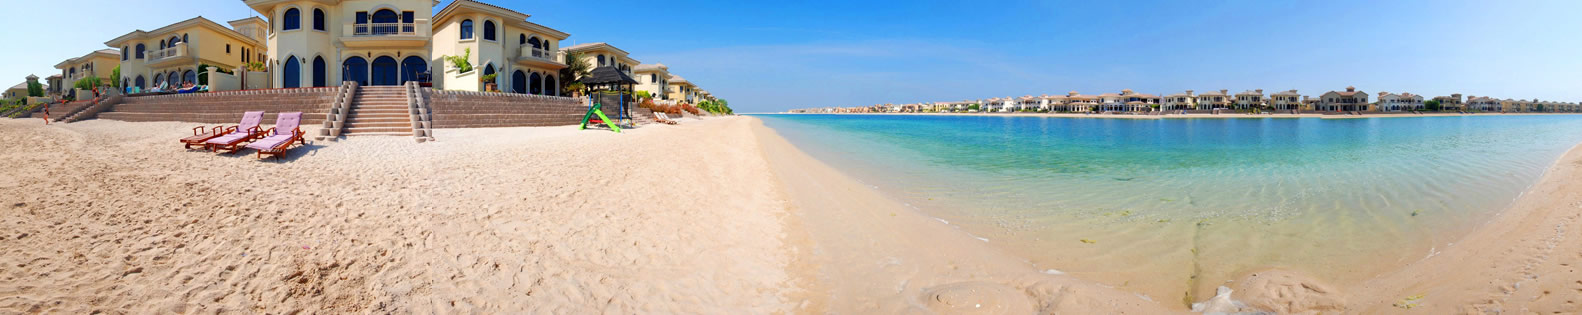 Stay in a luxury at a Palm Jumeirah Holiday Villa